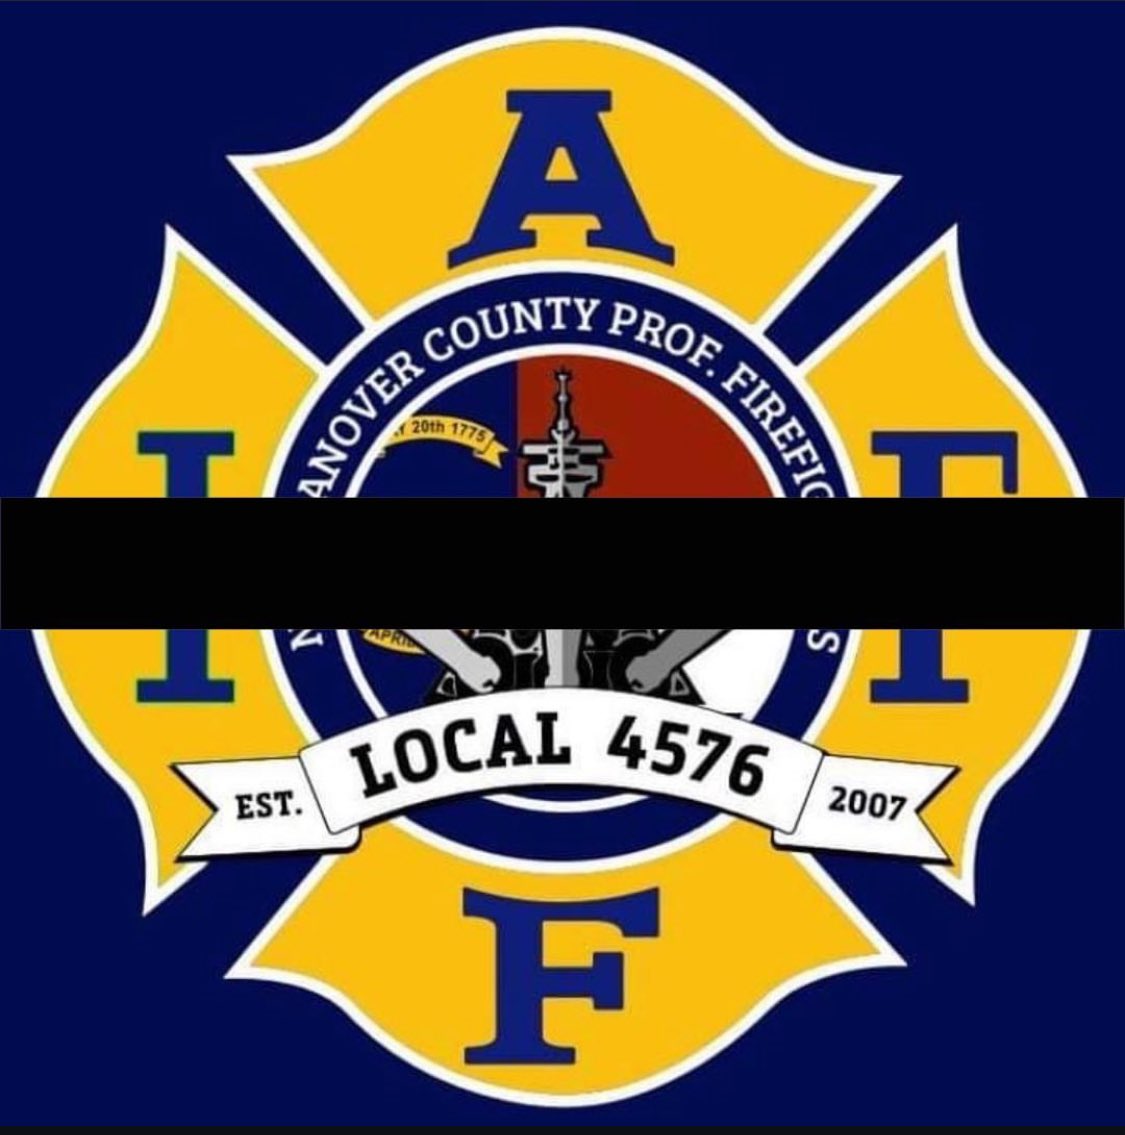 With a heavy heart, we come together to mourn the passing of Captain Courtney Padgett, a cherished member of both L4576 and NHCFR. During this difficult time, we kindly ask that you keep his loved ones in your thoughts and prayers. #cancersucks #firefightercancer